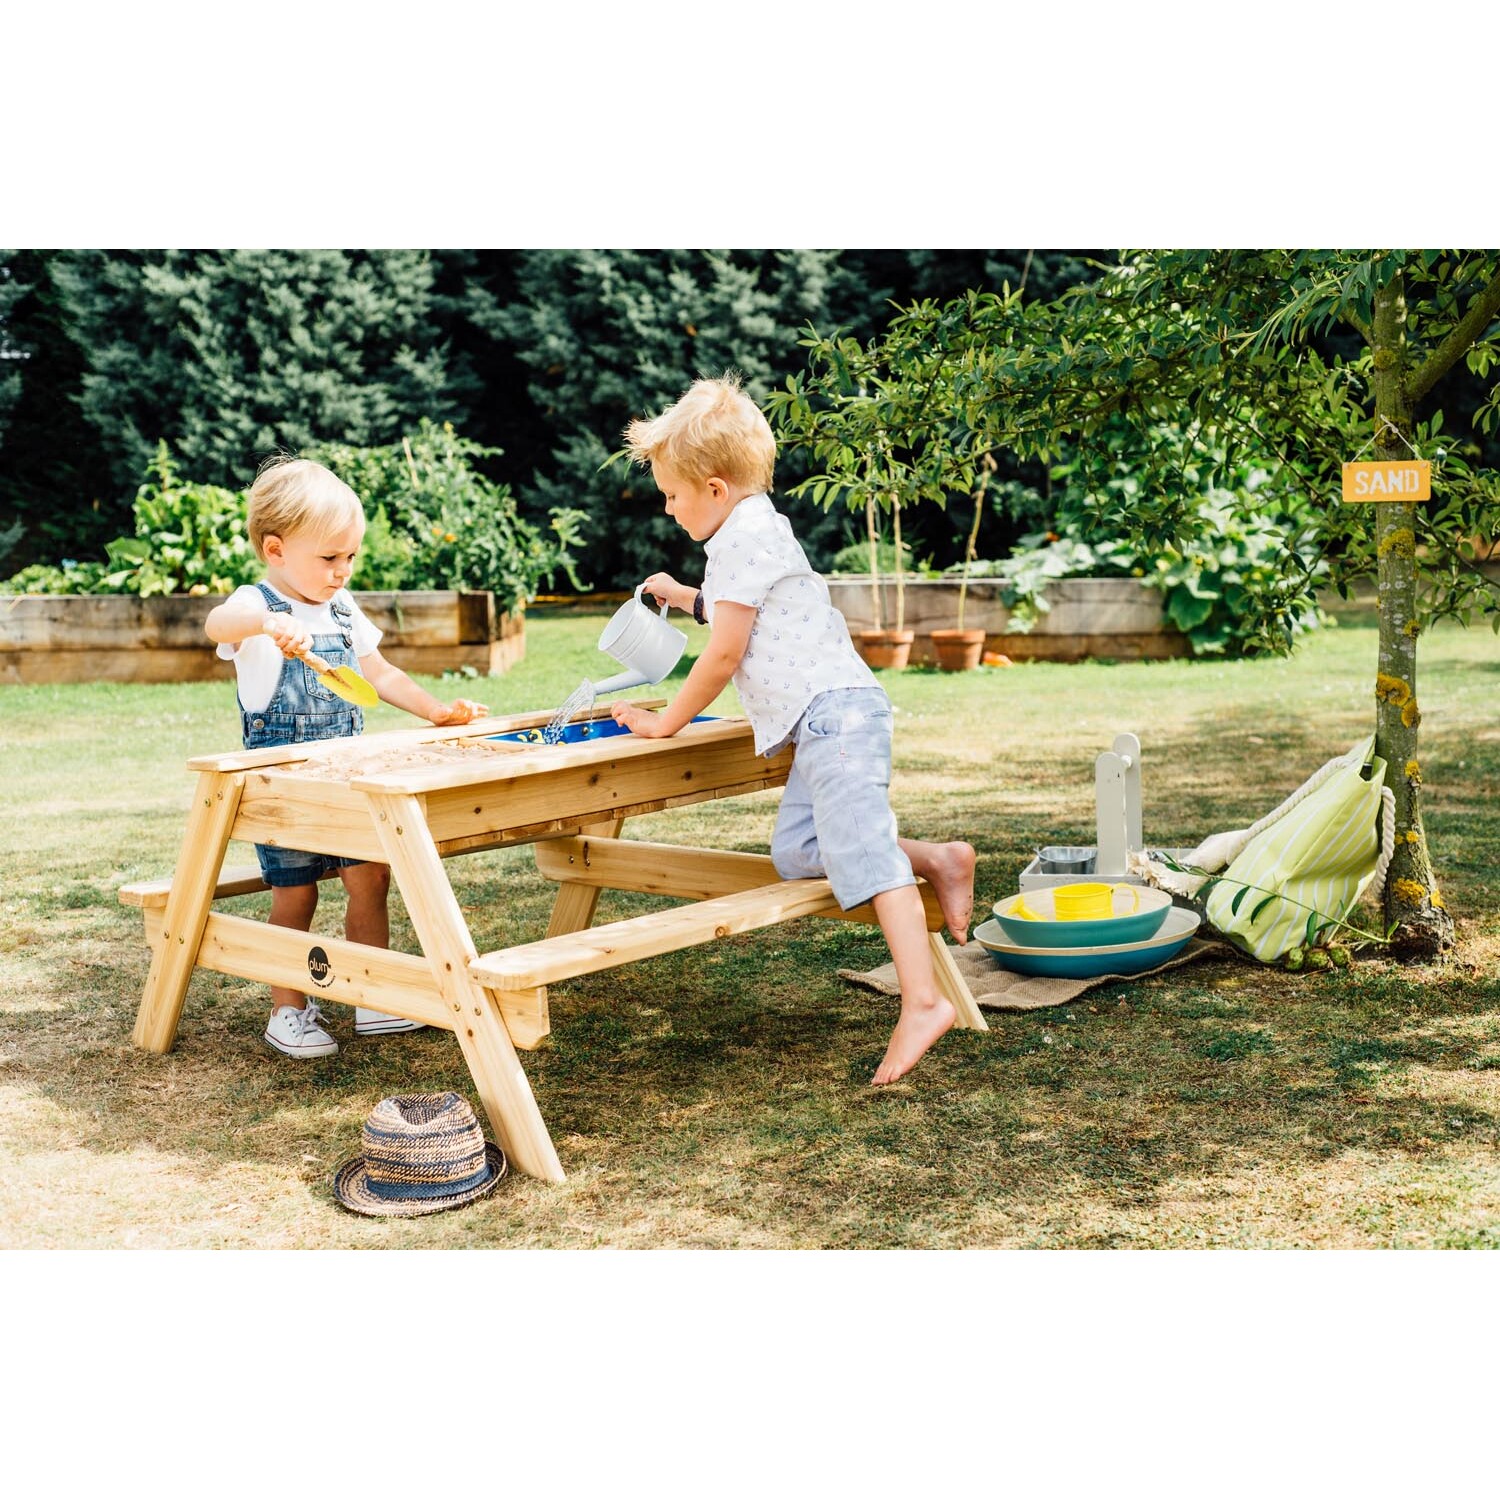 Wooden Sand & Water Picnic Table - Brown Image 3